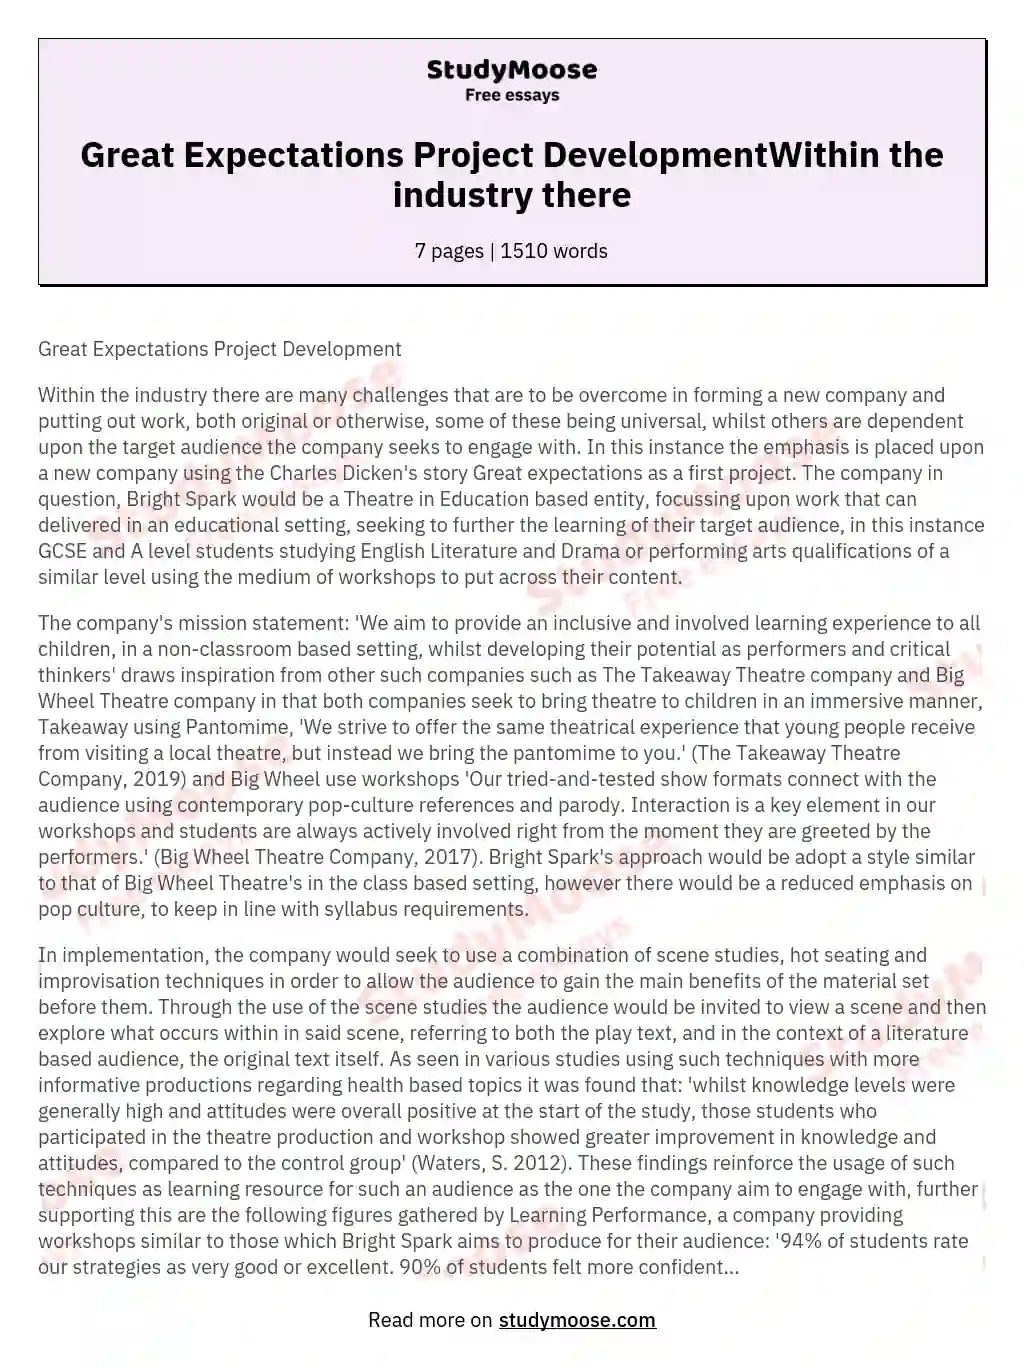 Great Expectations Project DevelopmentWithin the industry there essay